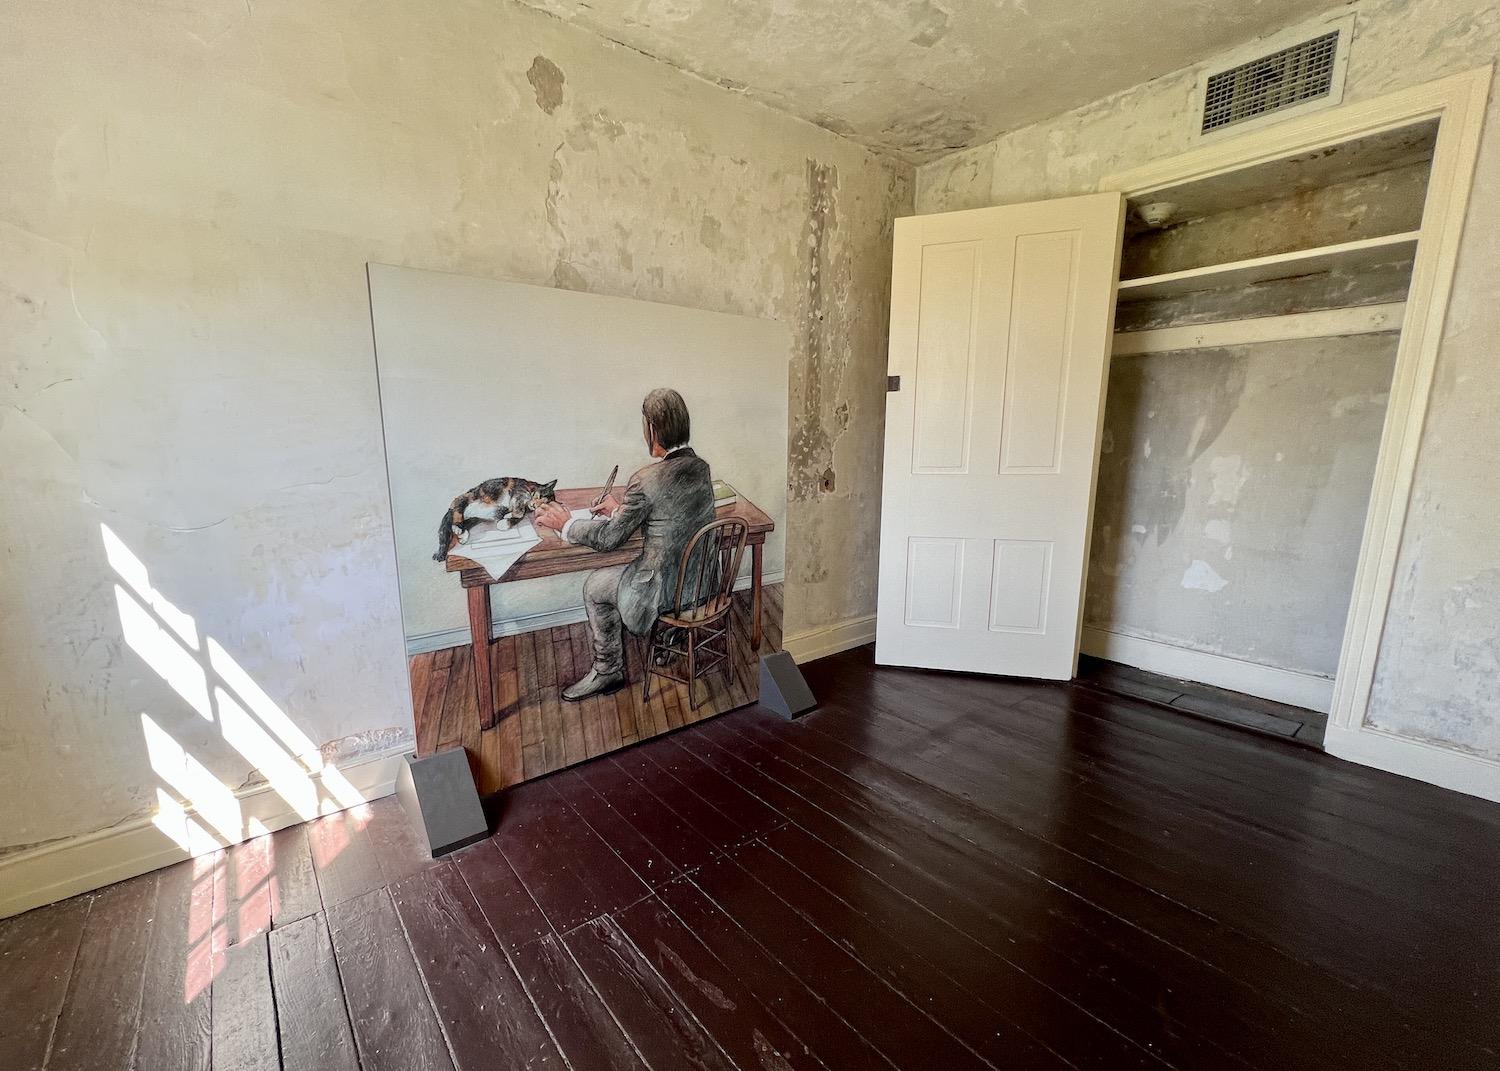 In a small second-floor room, a painting depicts Edgar Allan Poe writing alongside his cat.